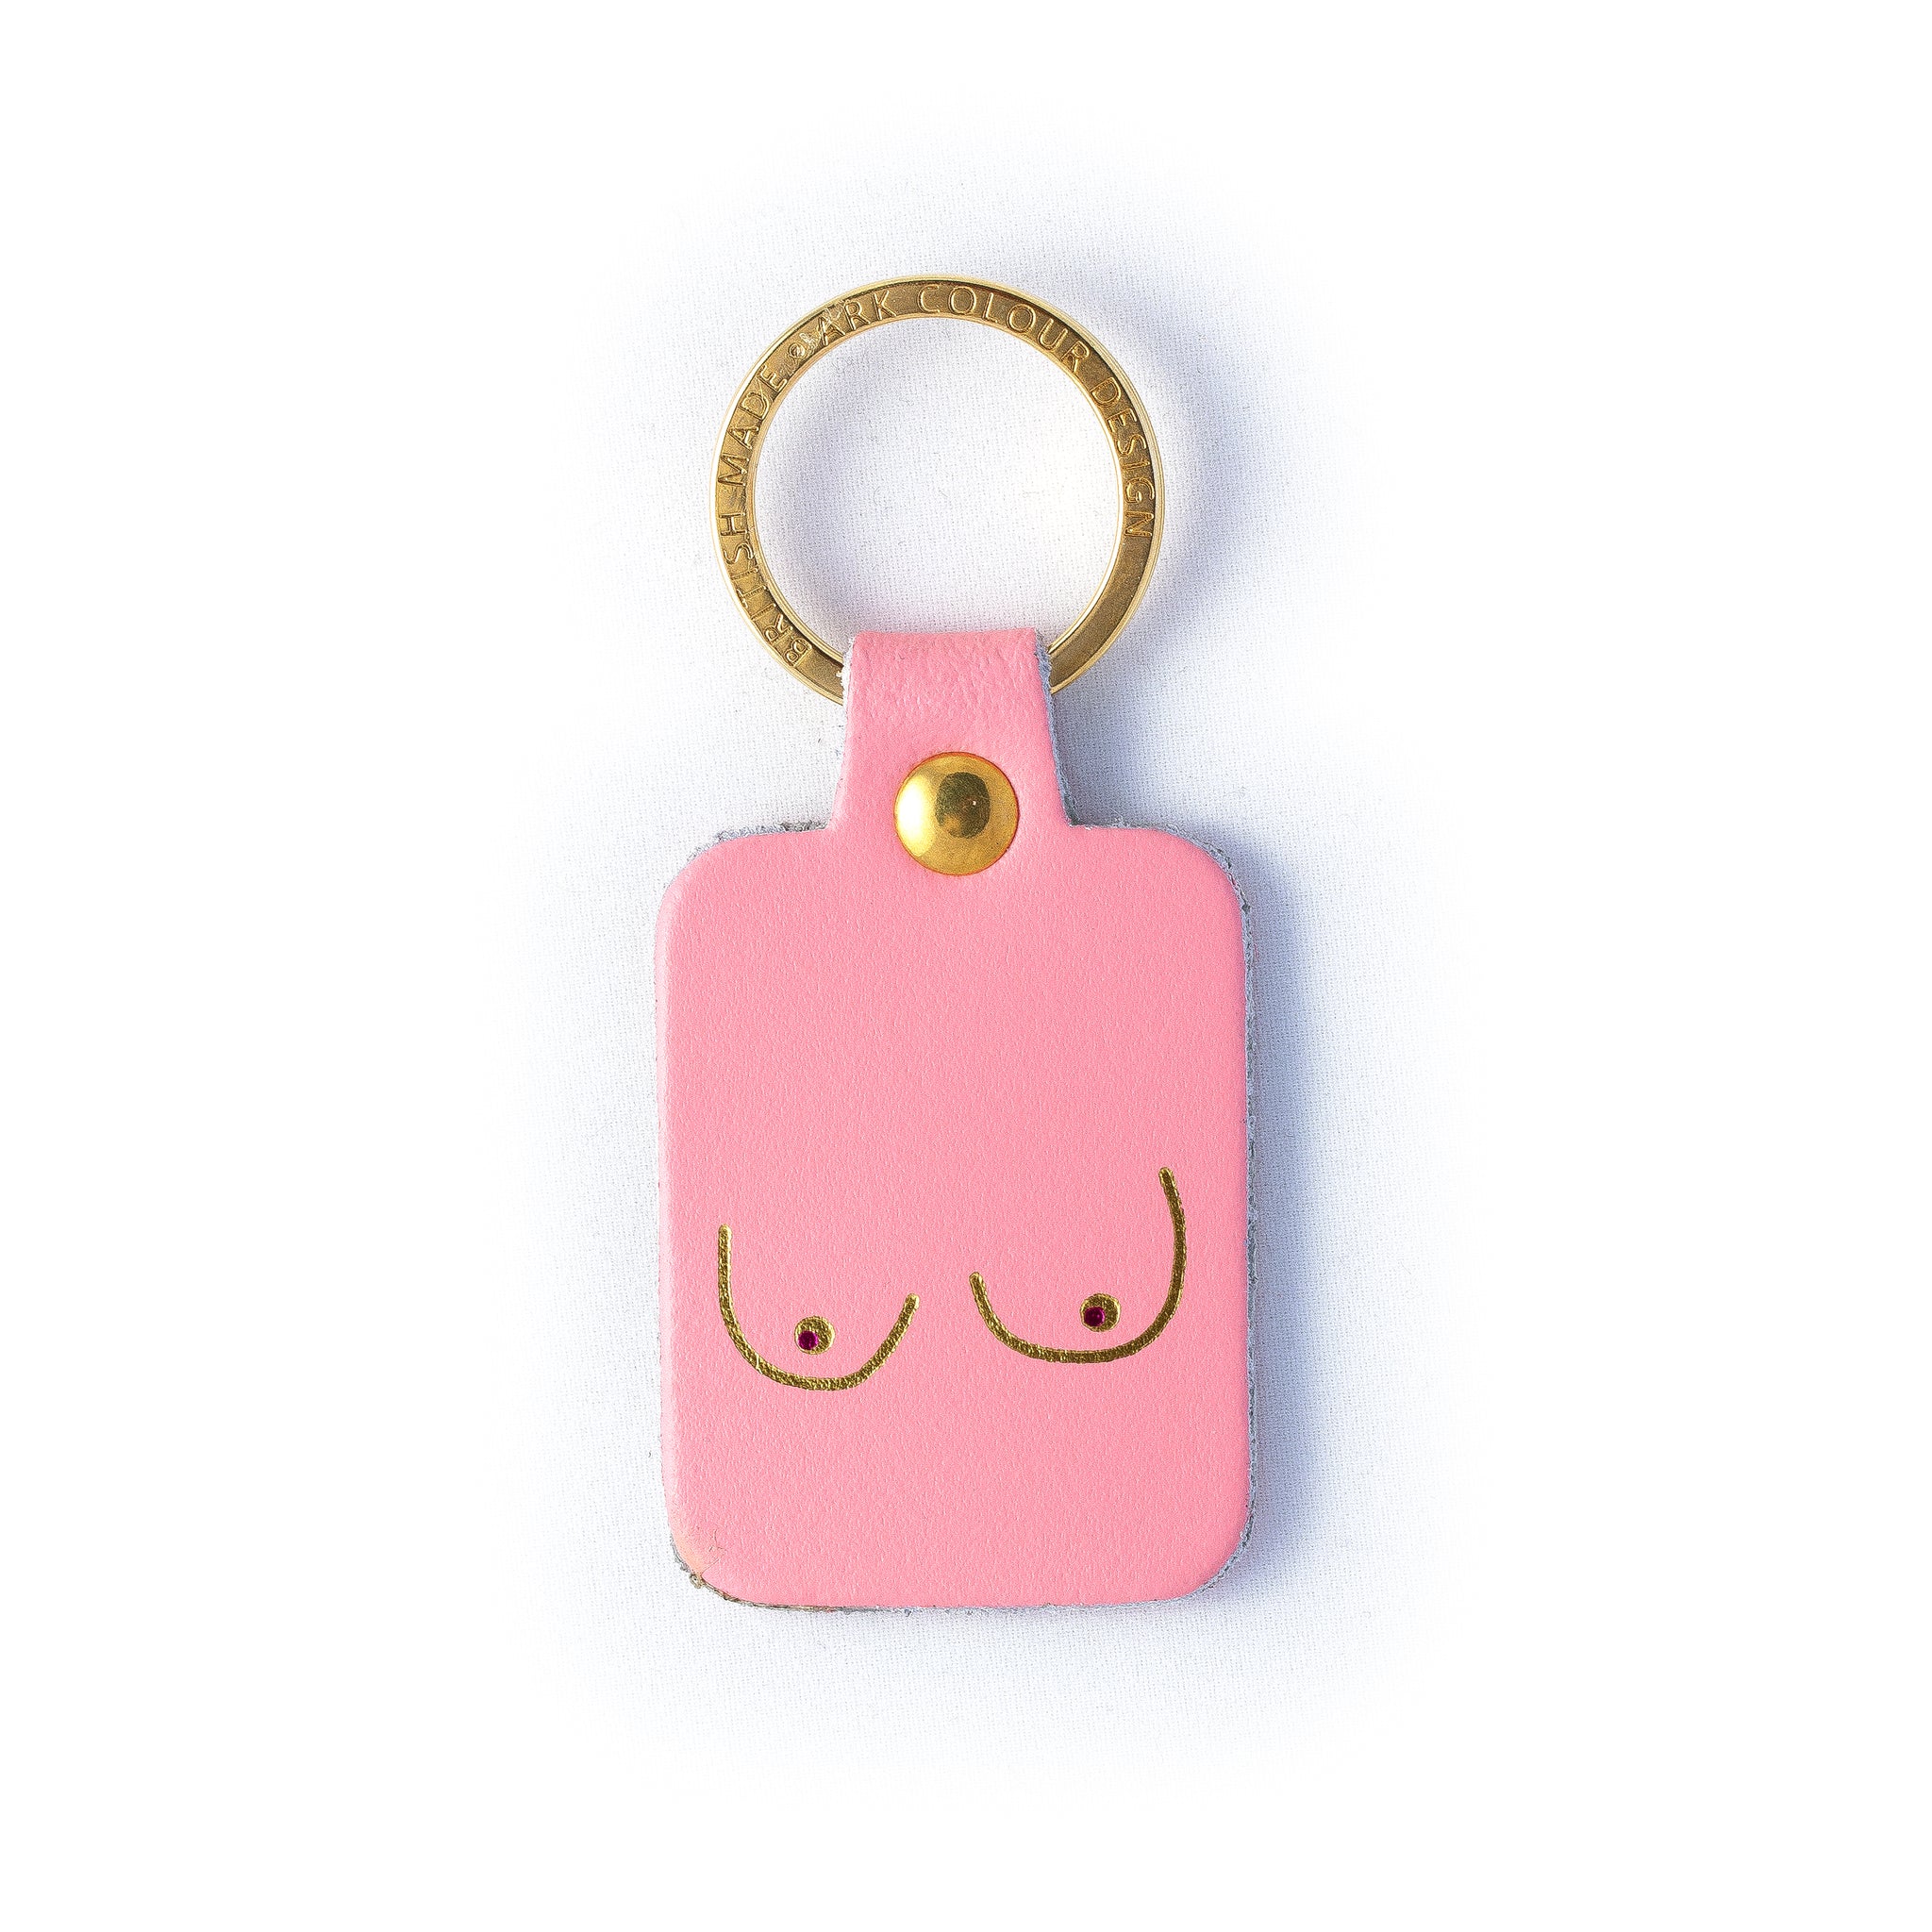 Boobs Leather Key Fob - Pink